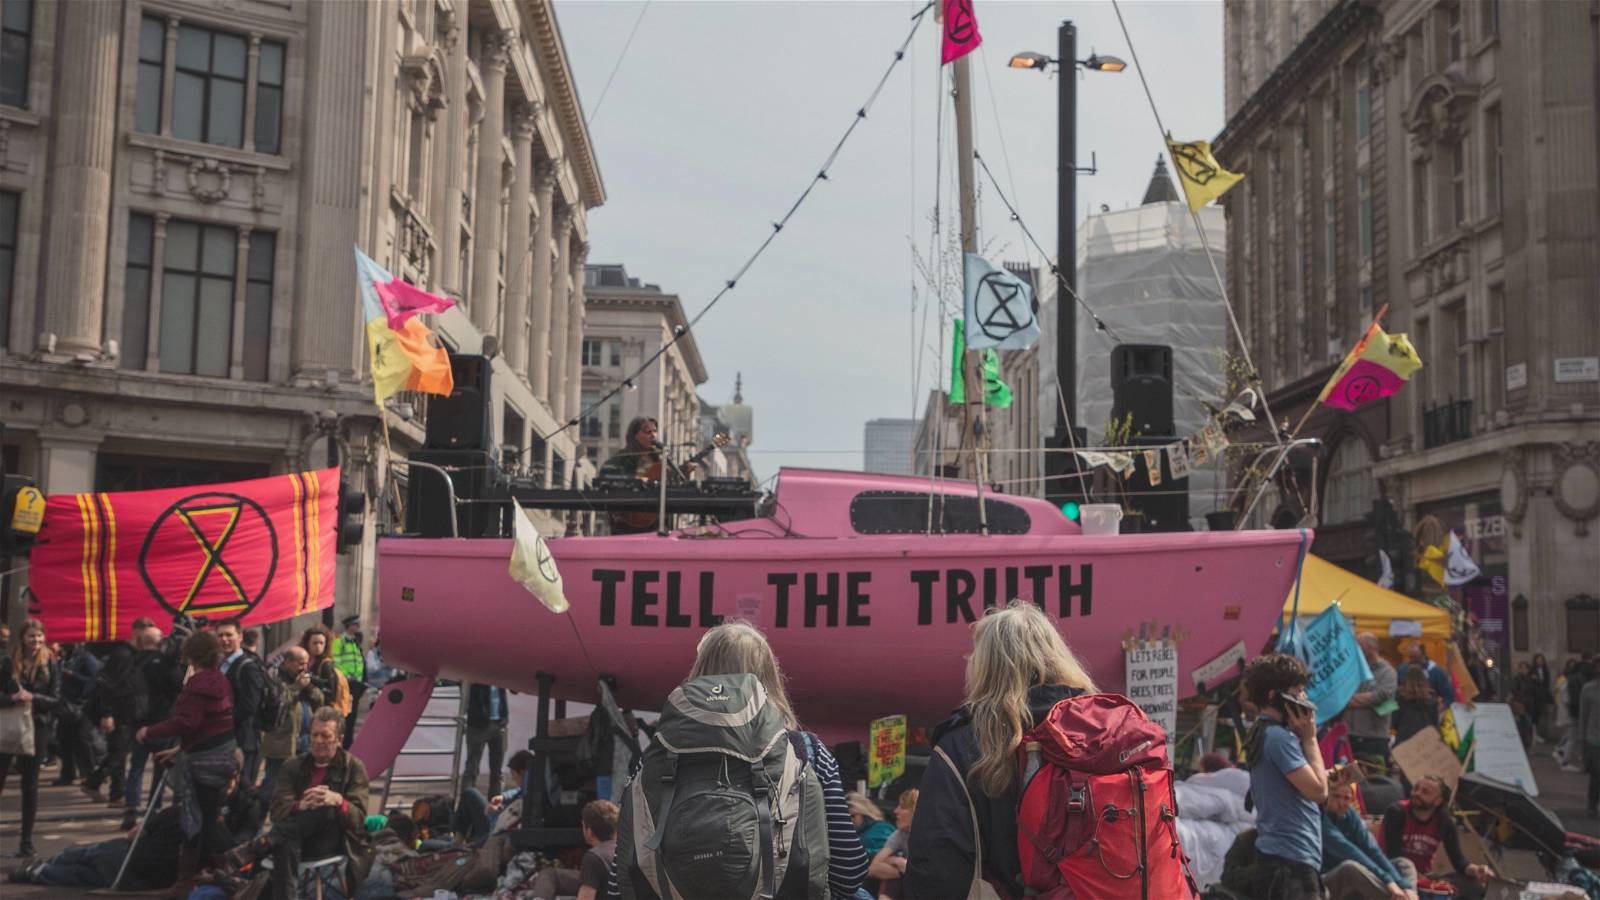 Emerging Securities Part 2 of 3: Extinction Rebellion, Dangerous Anarchists Or Peaceful  Protestors? 